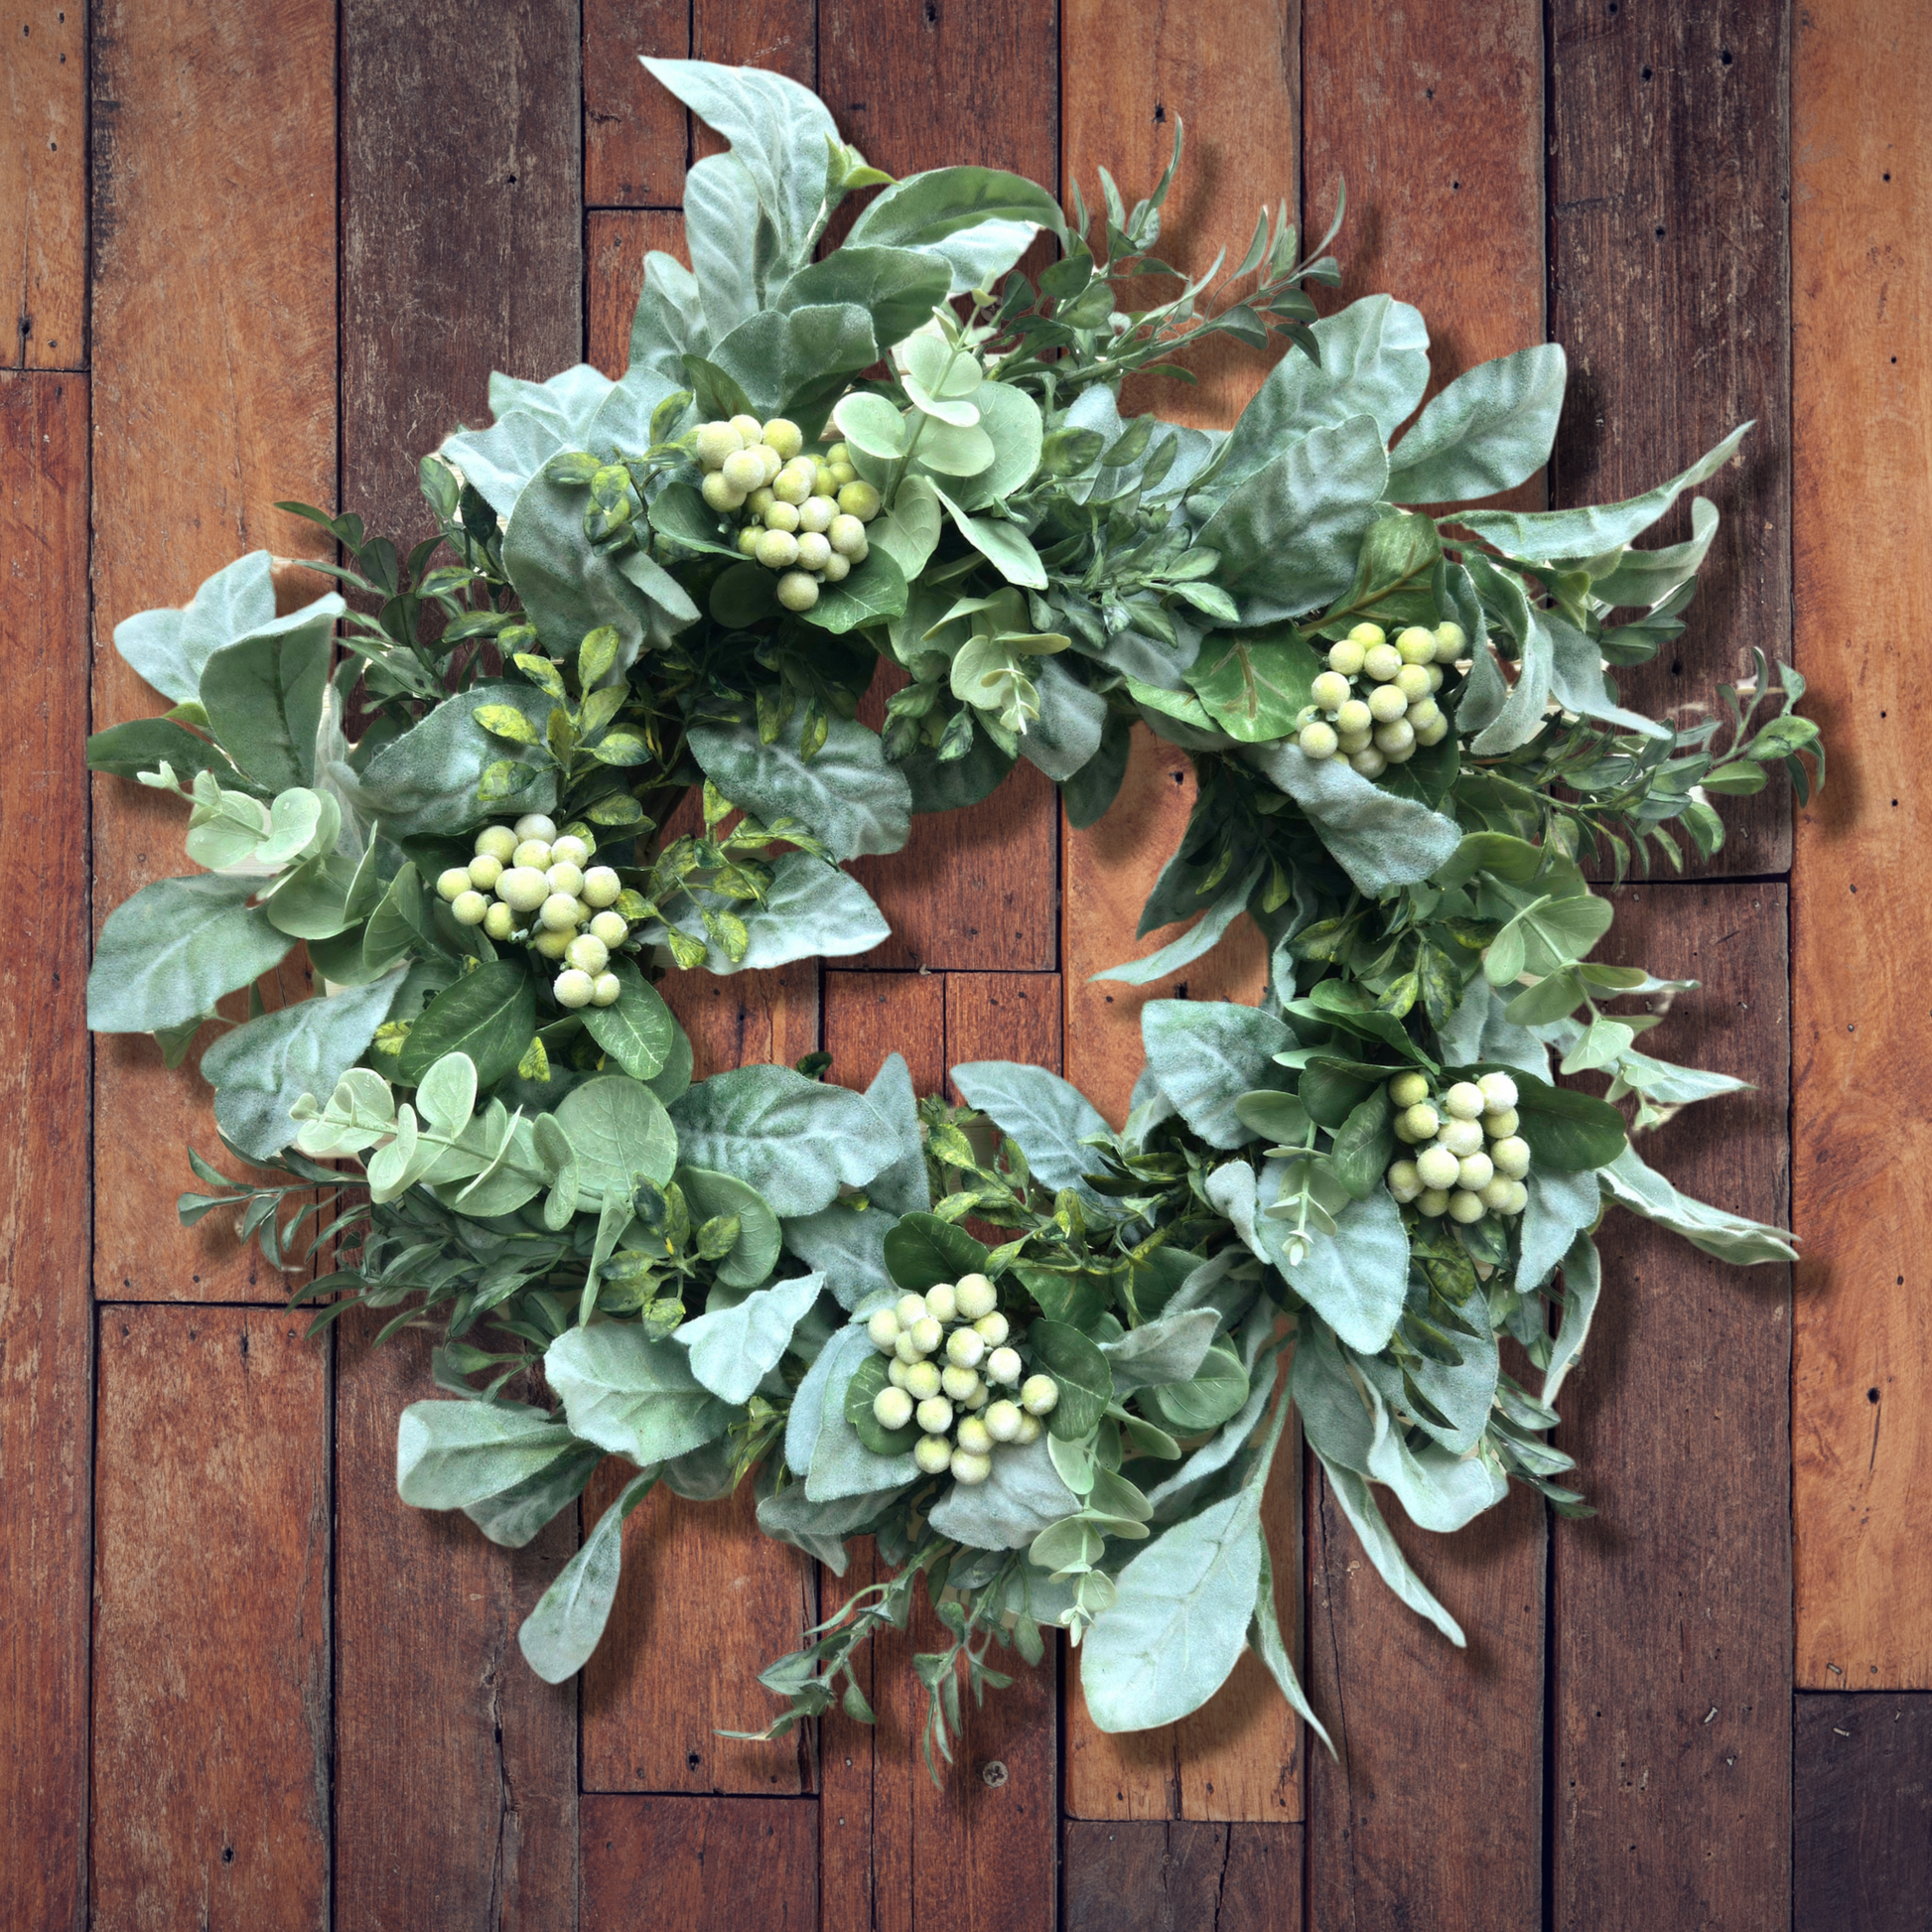 Faux Lambs Ear Wreath with Eucalyptus and Berries for Year-Round Decor, front view.